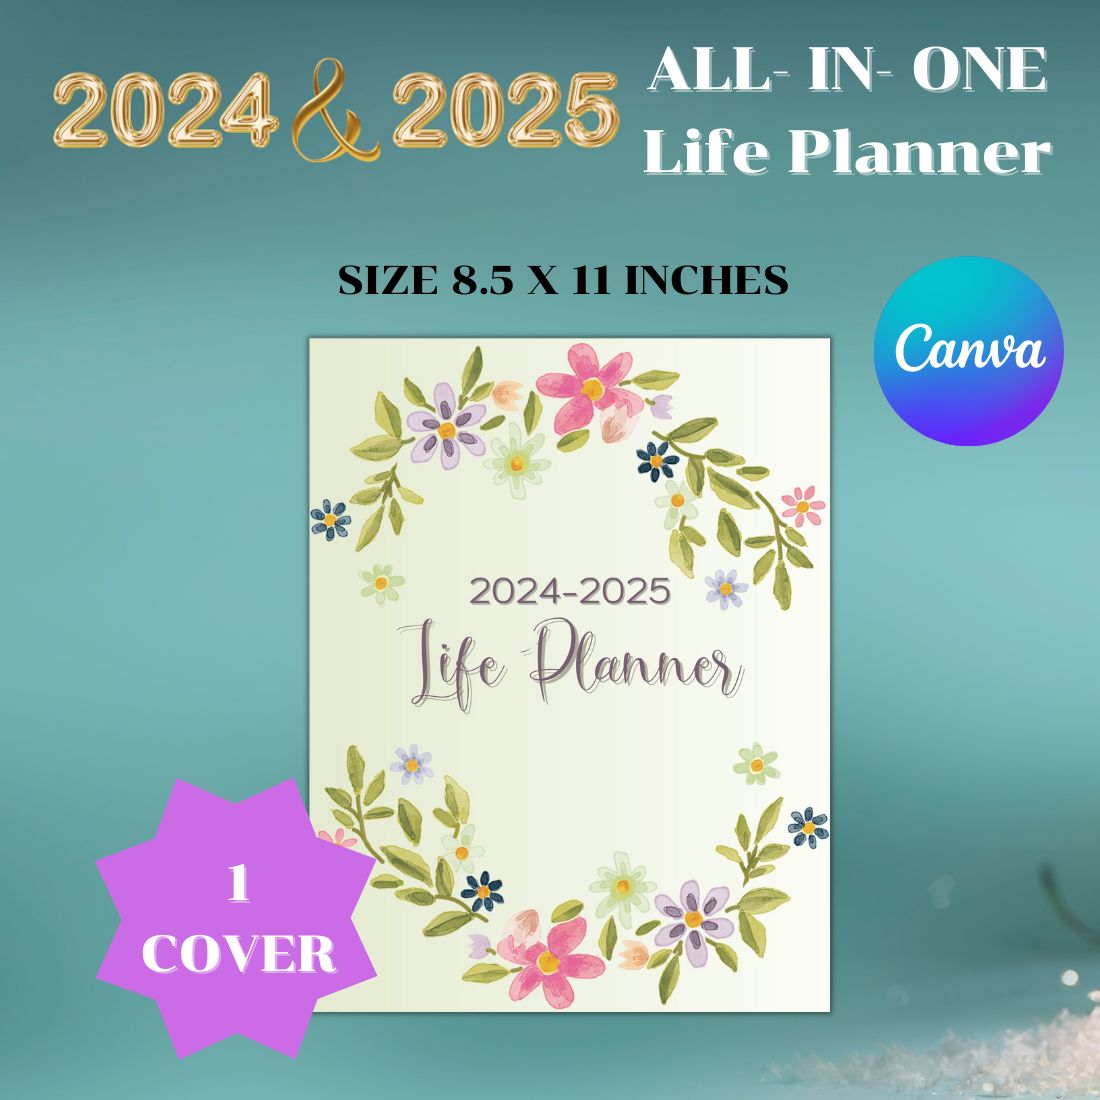 2024-2025 All-in-one Life Planner preview image.